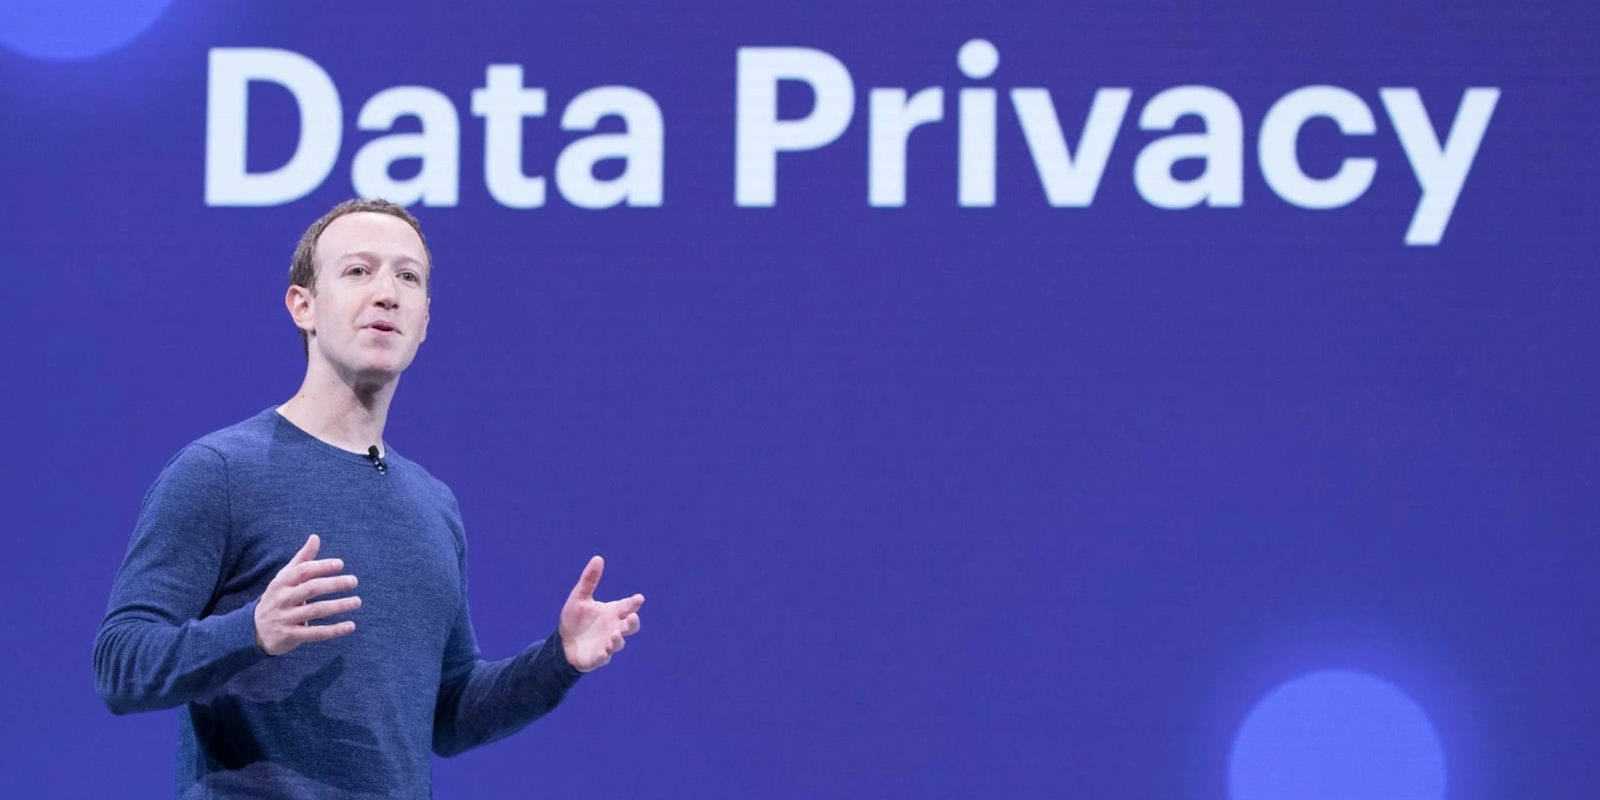 mark zuckerberg speaking at facebook event about data privacy